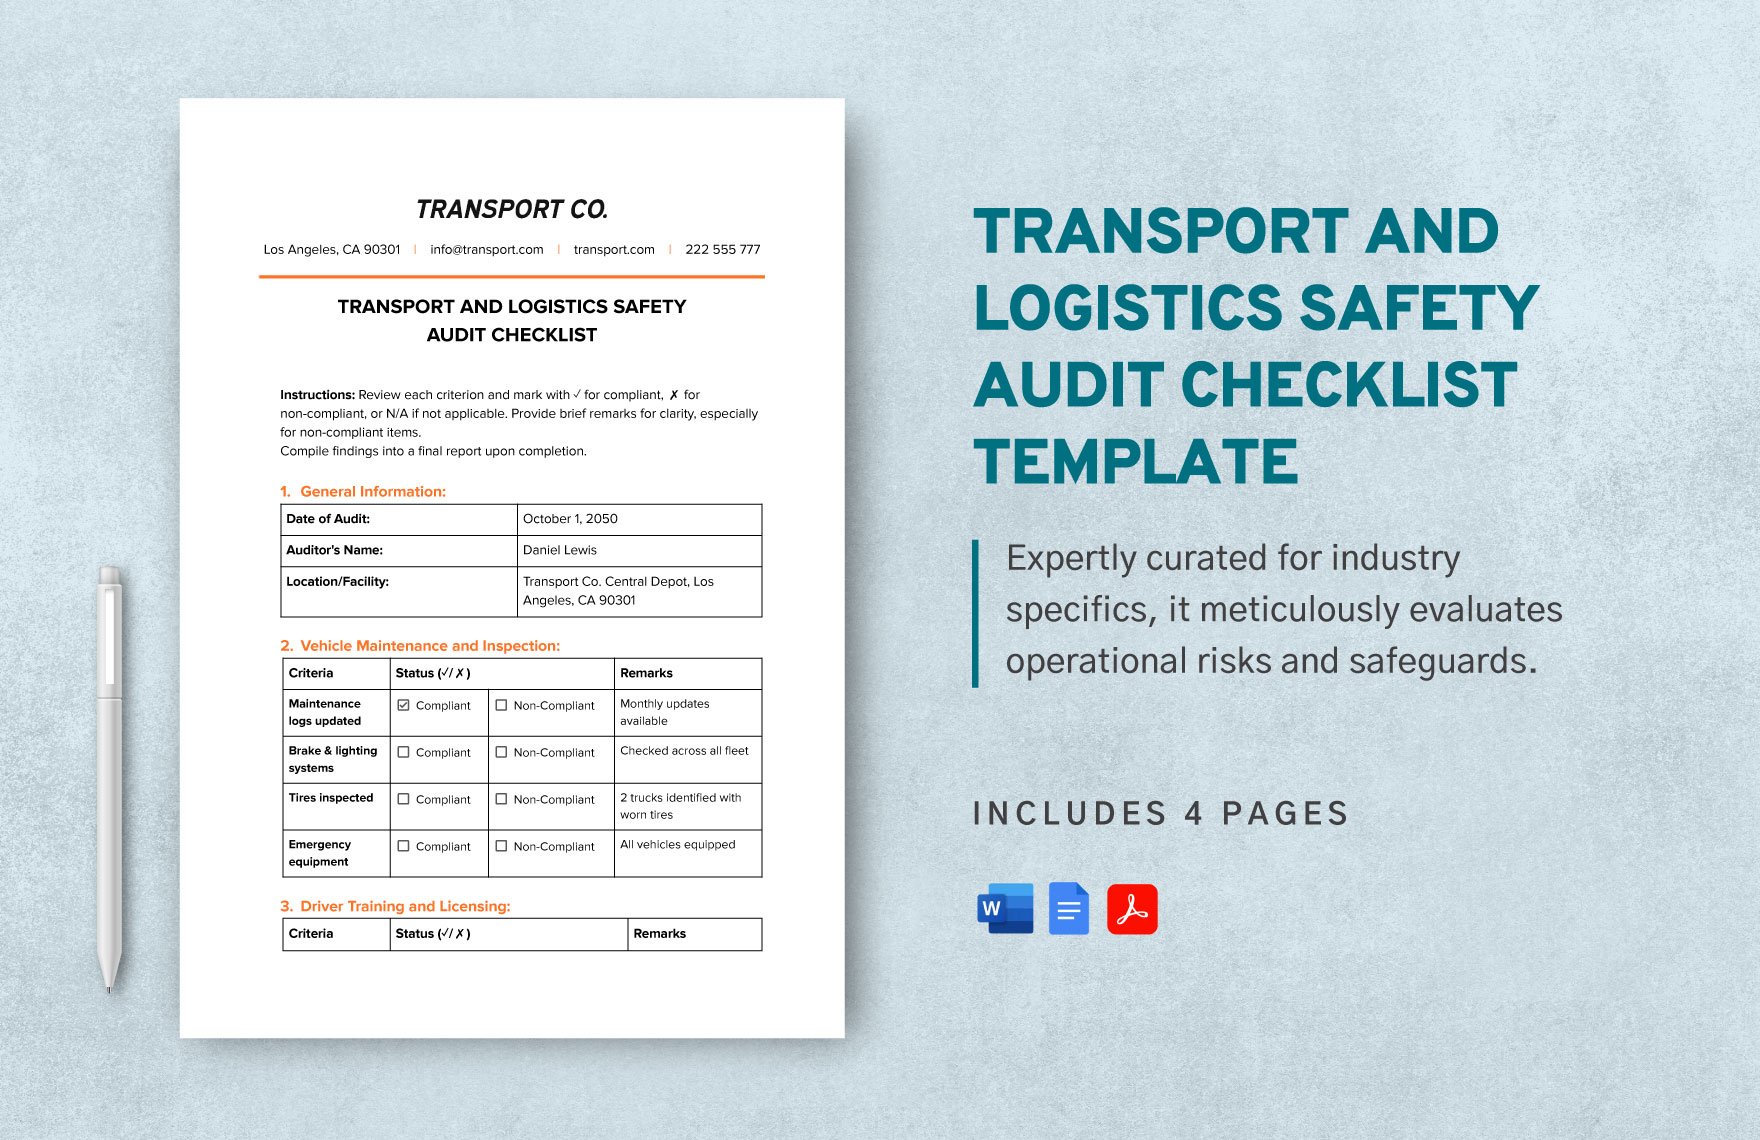 Transport and Logistics Safety Audit Checklist Template